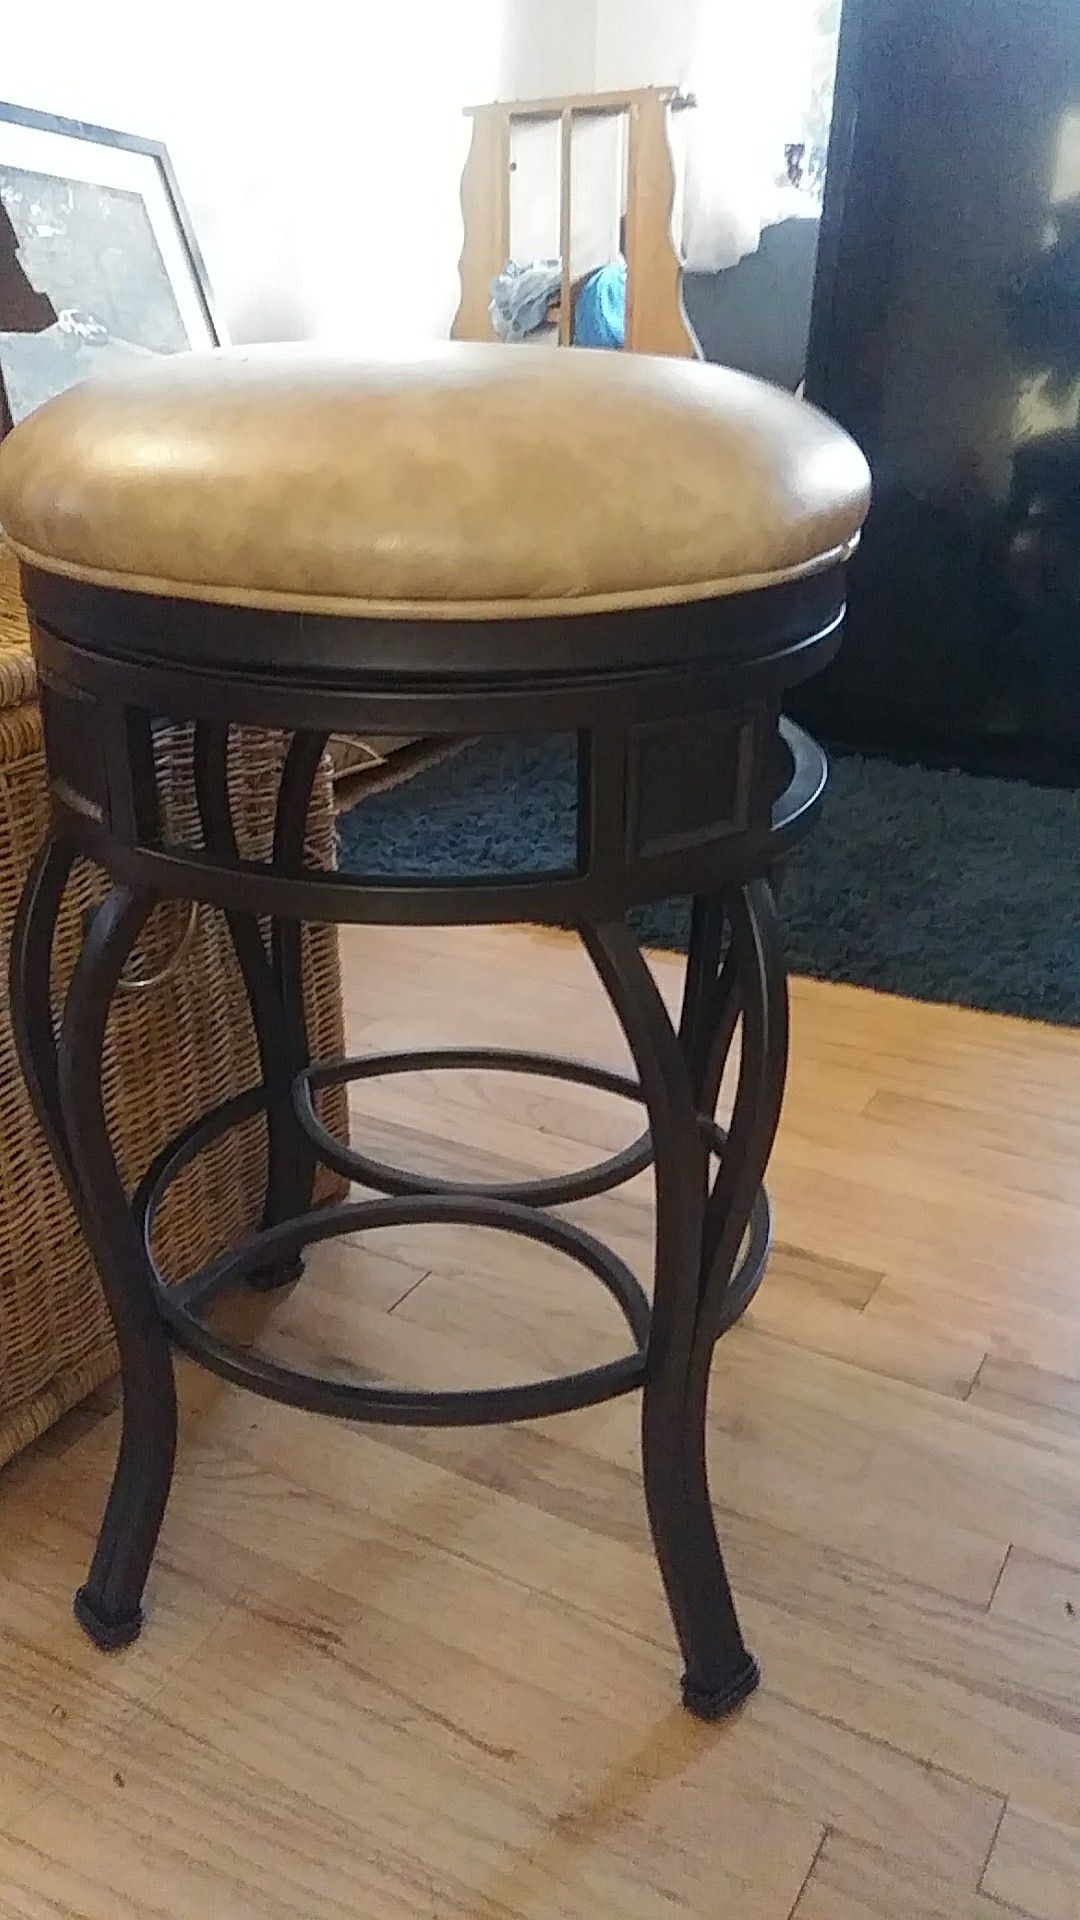 Metal and faux leather bar stool